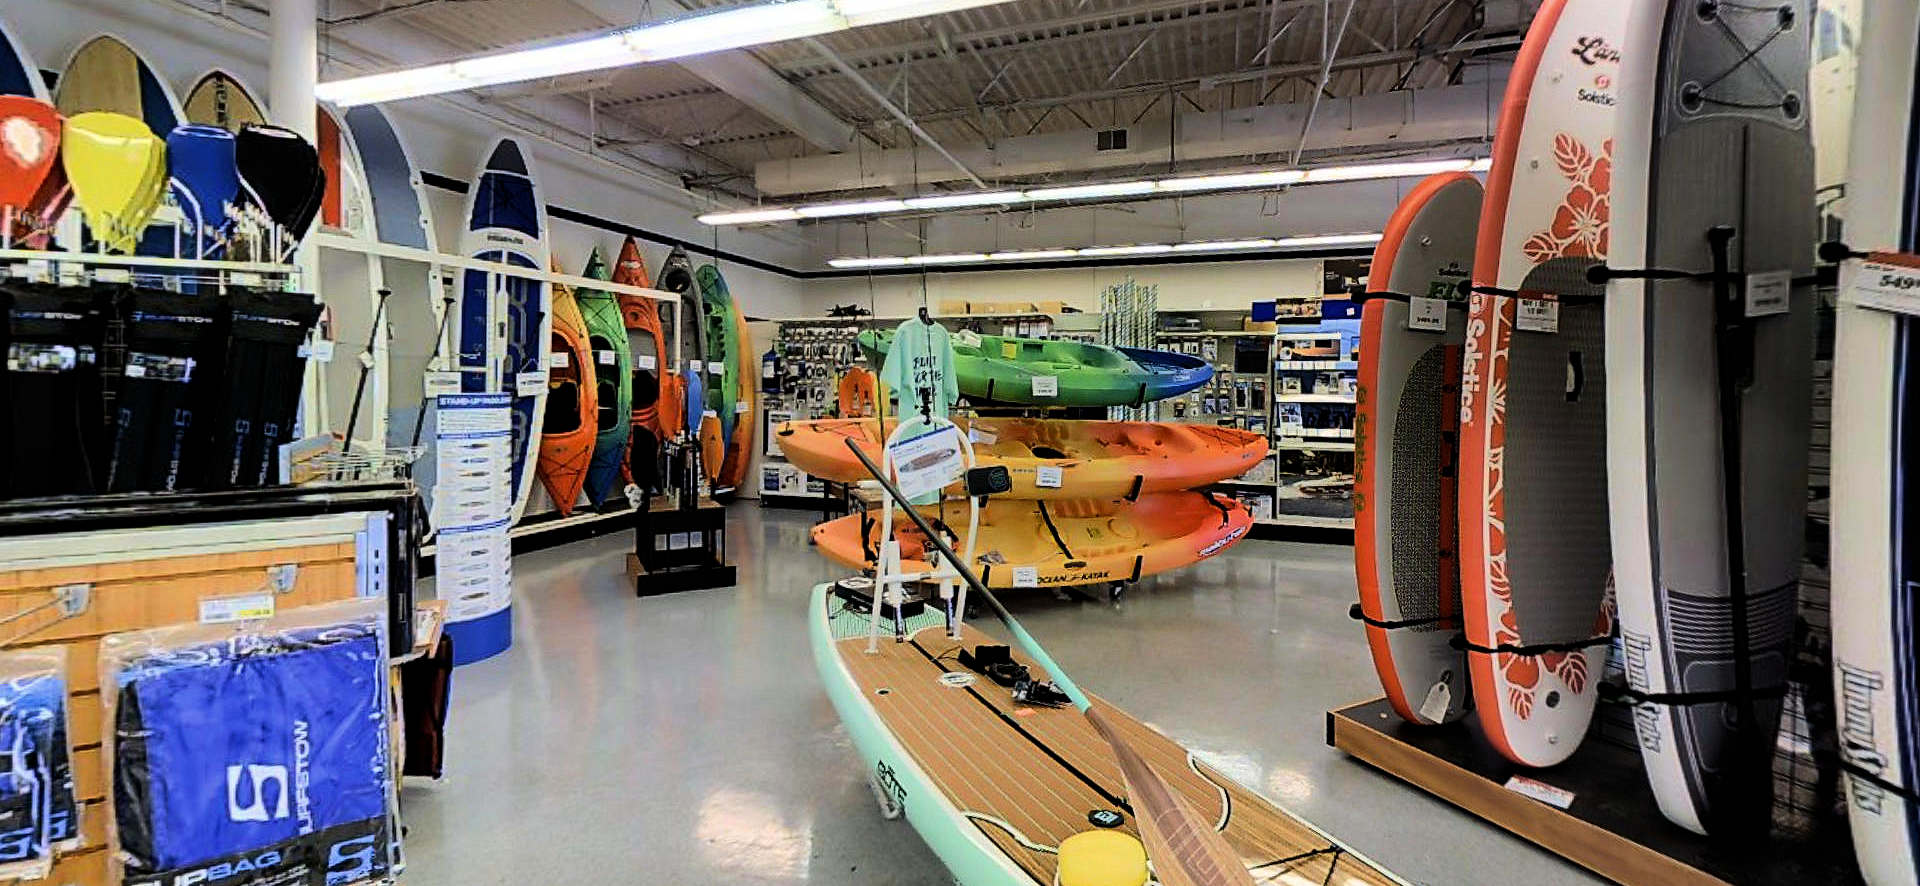 The Marine Web offers links to Ships Stores for all your boating supplies and accessories